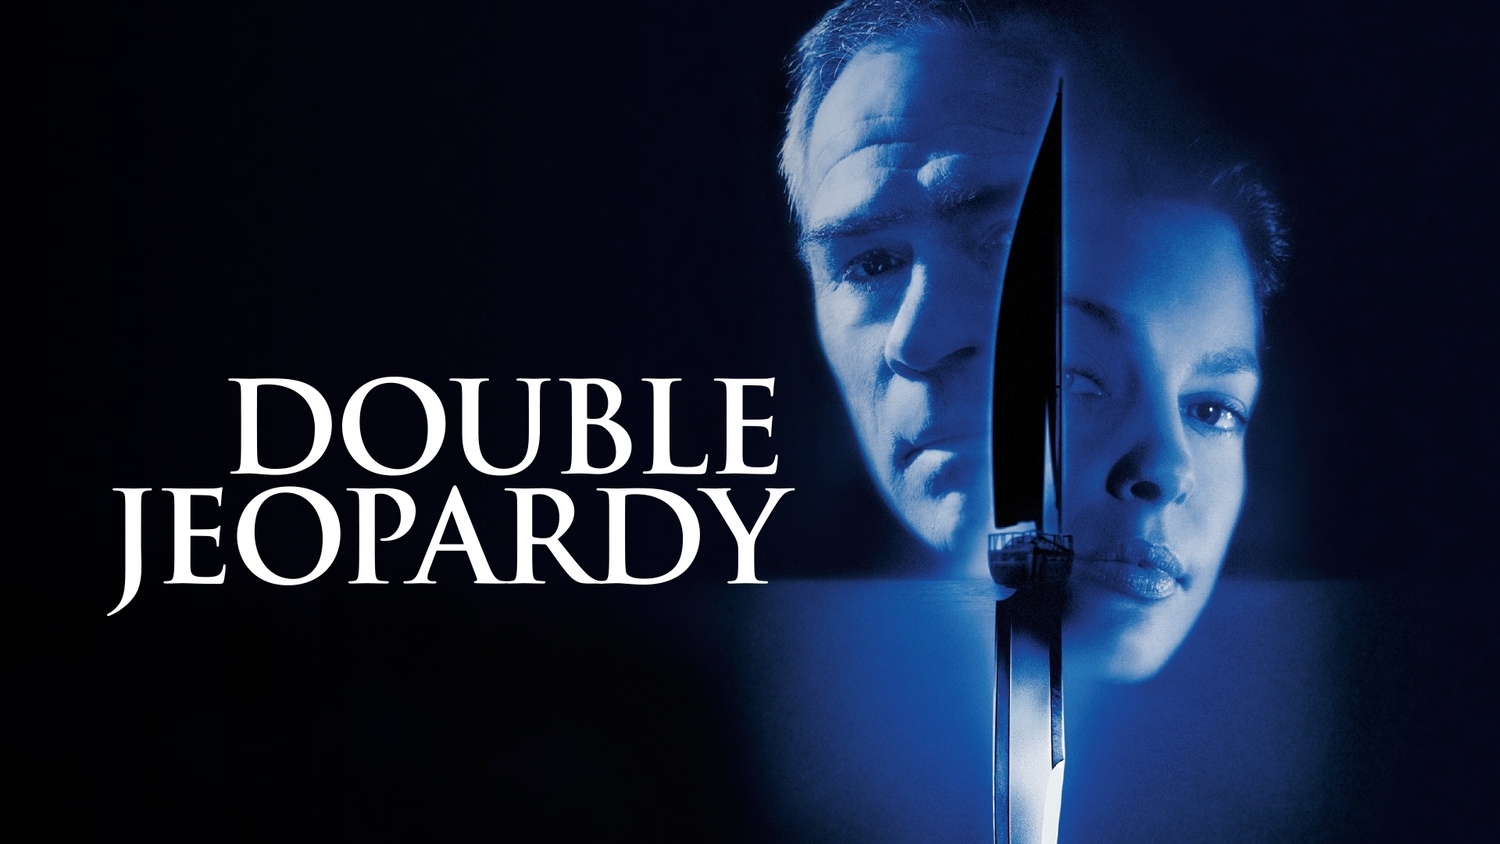 42 Facts about the movie Double Jeopardy - Facts.net